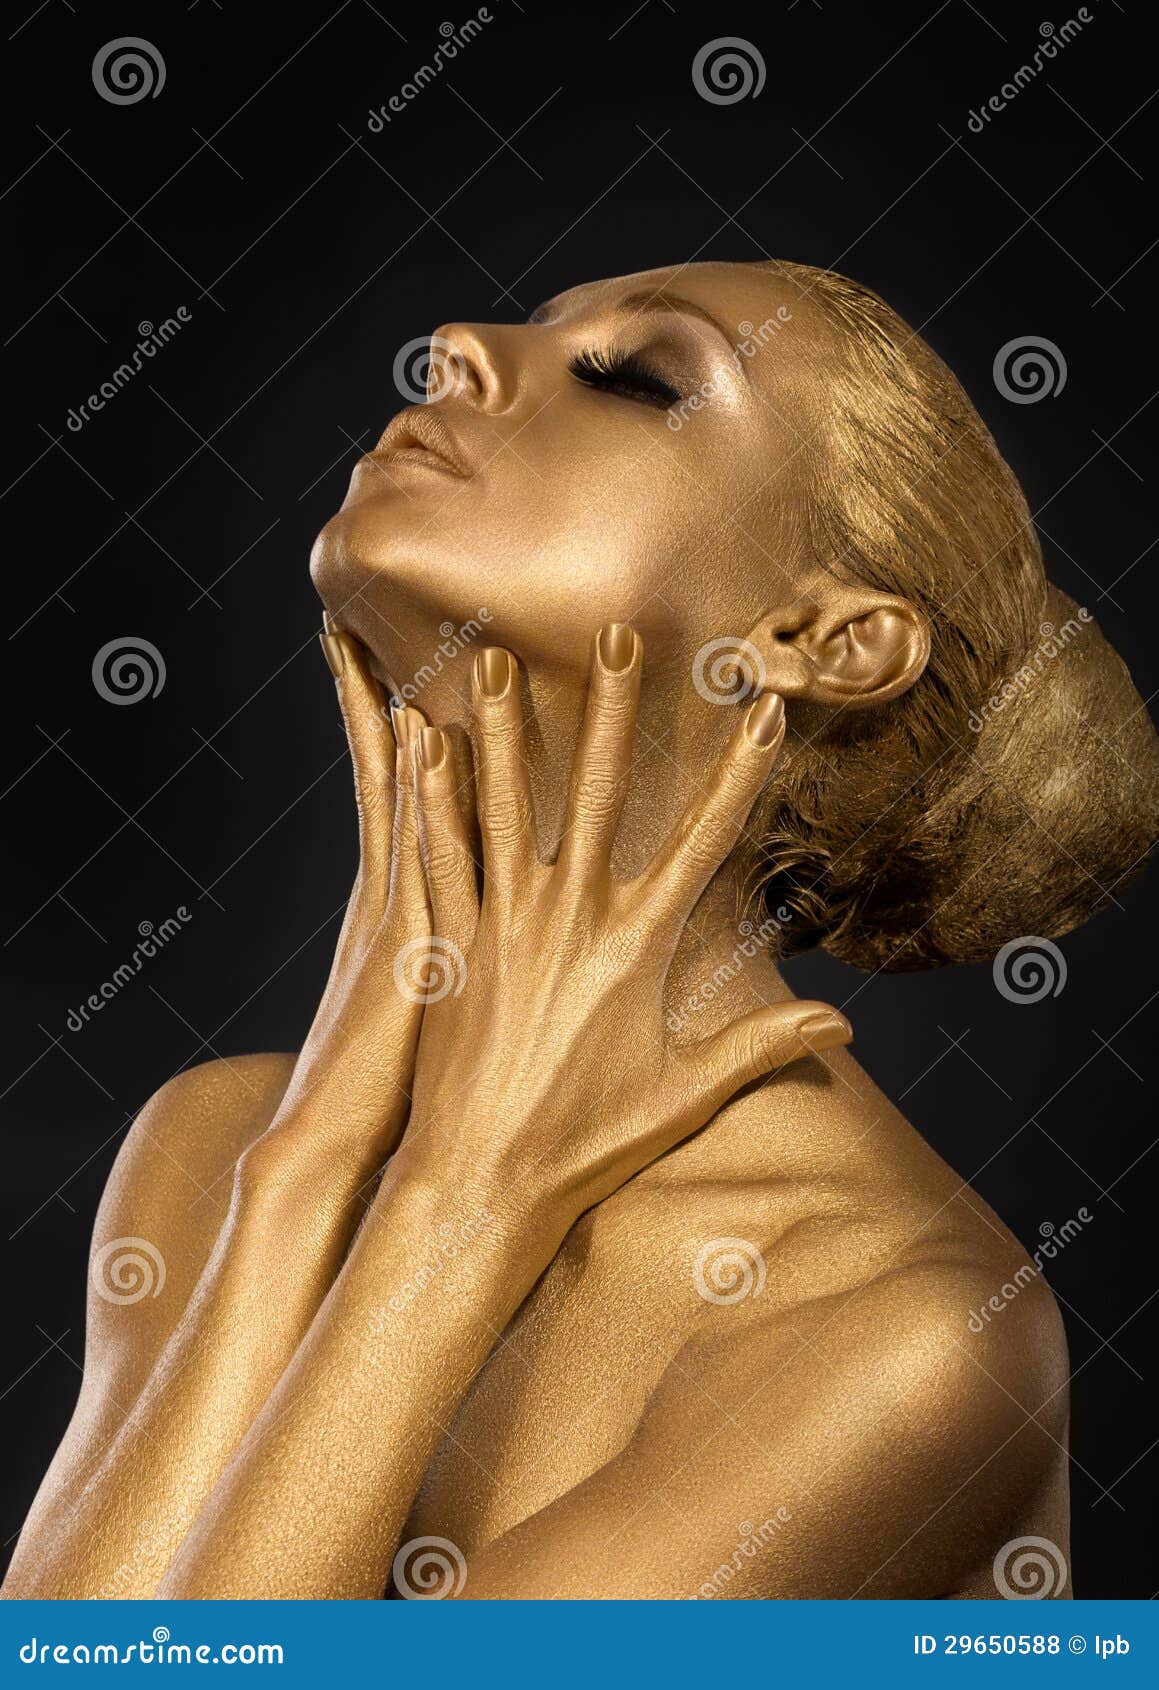 coloring. gilt. golden plated woman's face. art concept. gilded body. focus on her hands